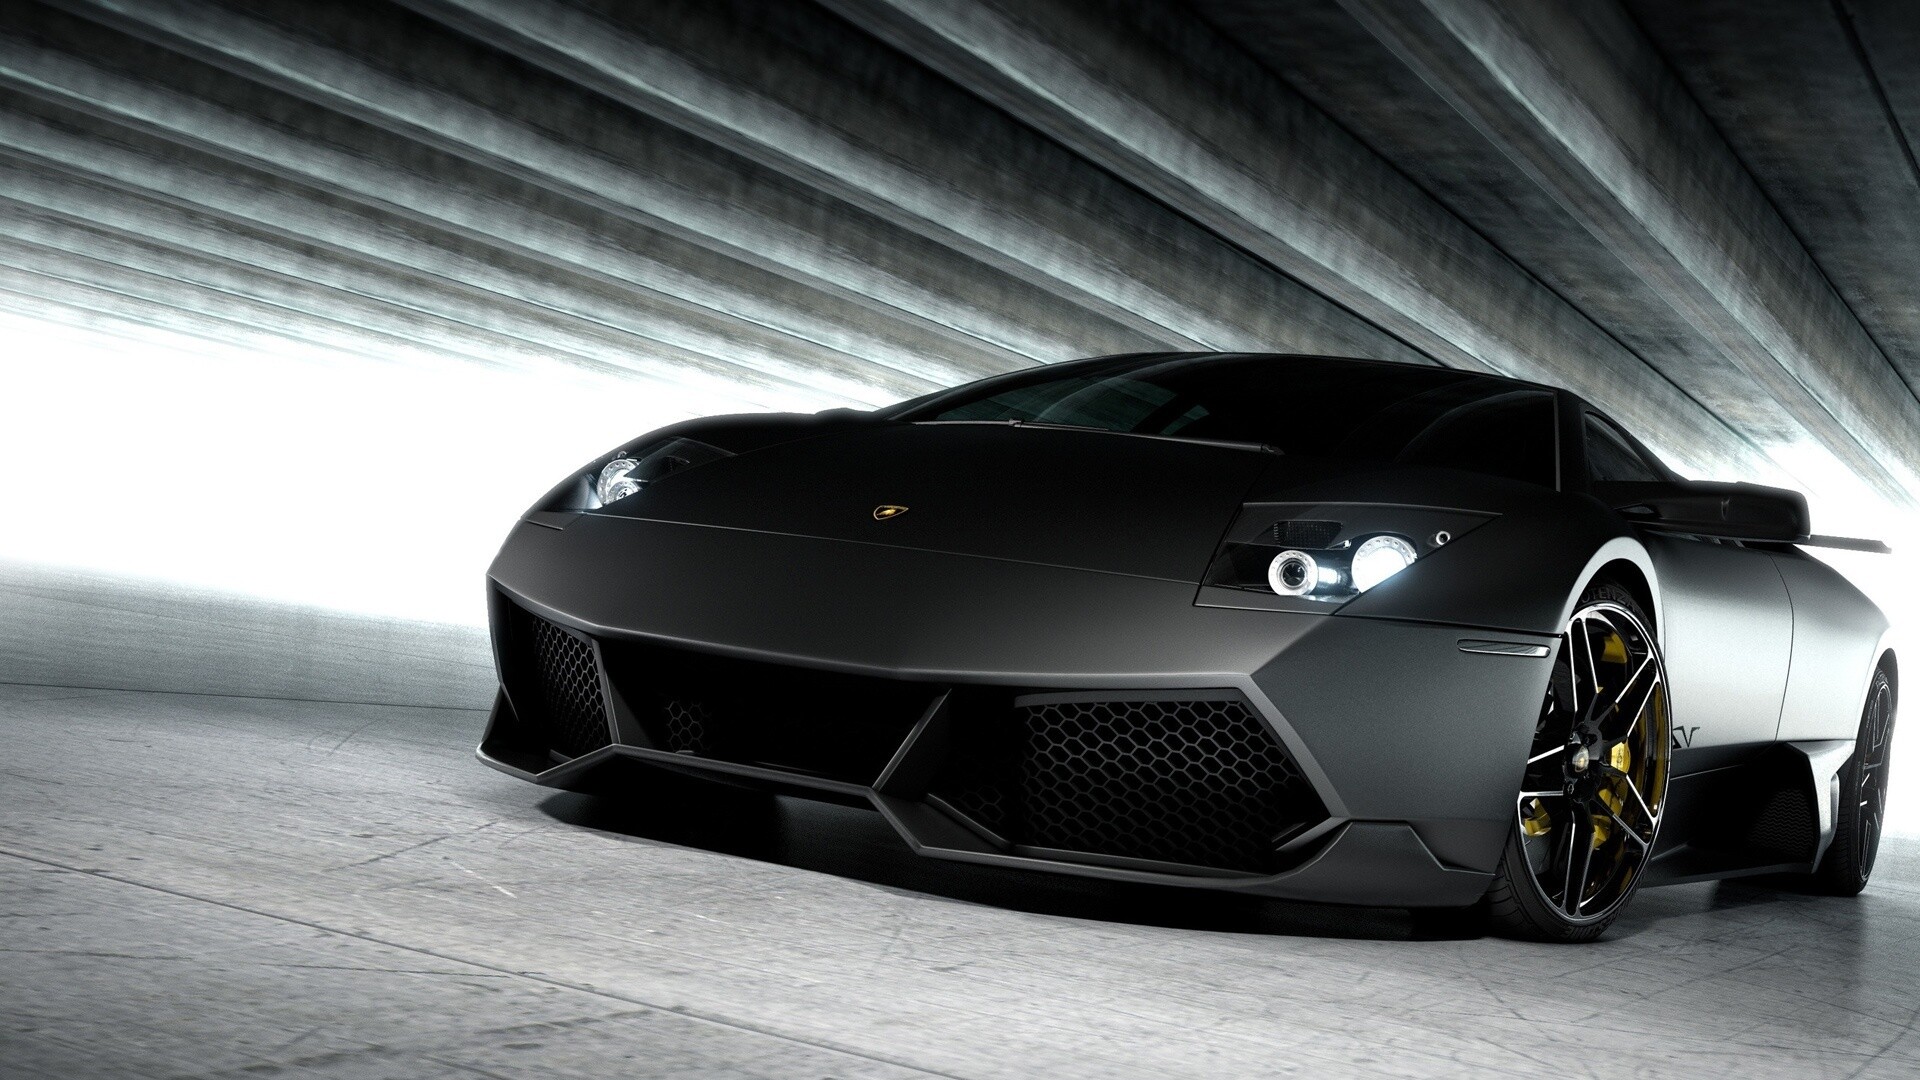 Lamborghini: The final update to the Murcielago came in 2009 with the introduction of the LP 670–4 SV. 1920x1080 Full HD Background.